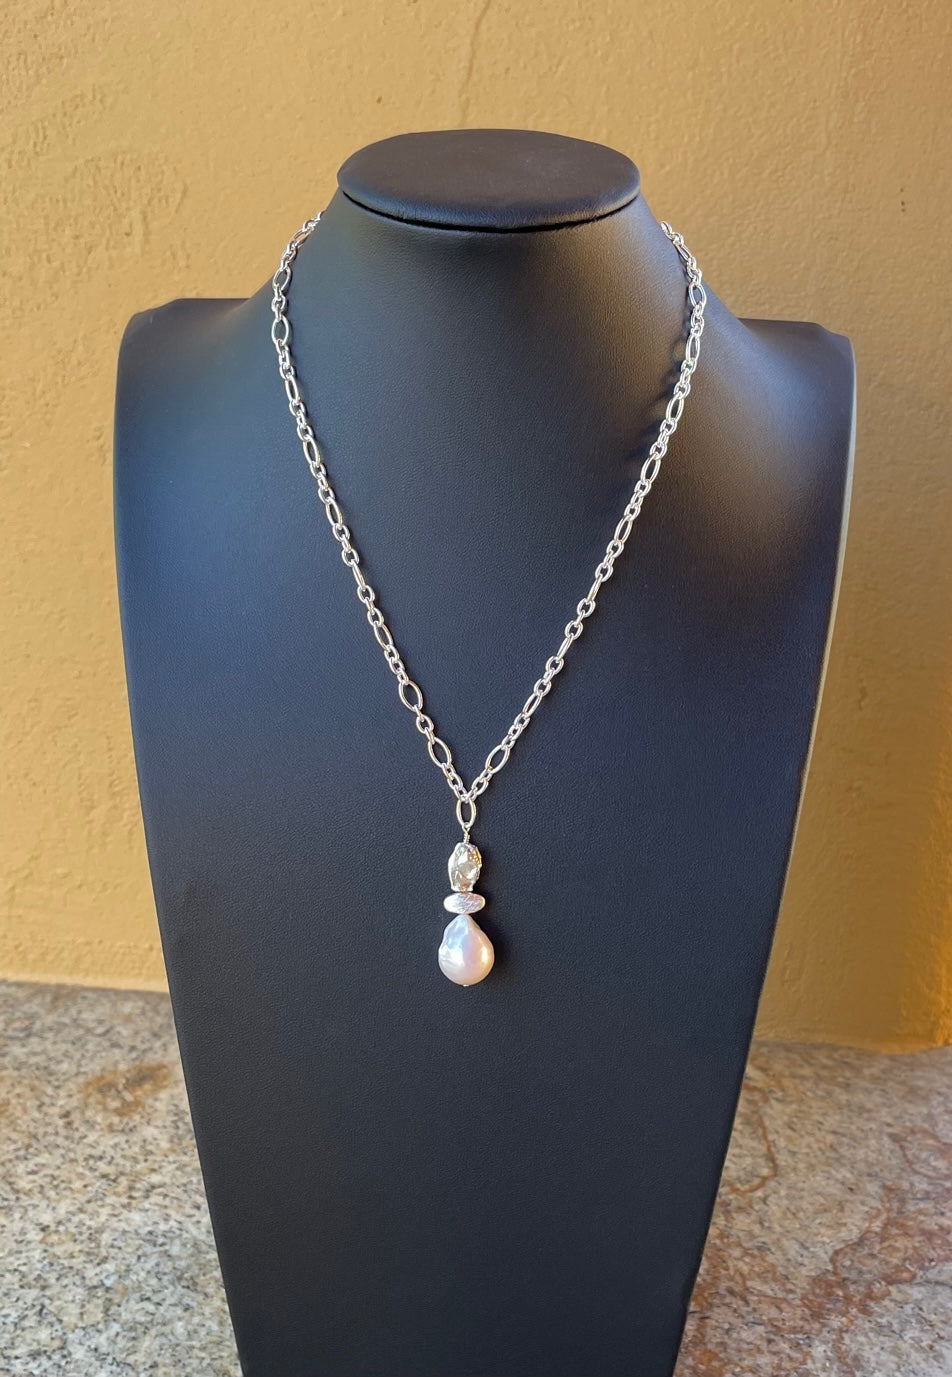 Necklace - Pearl and sterling silver necklace